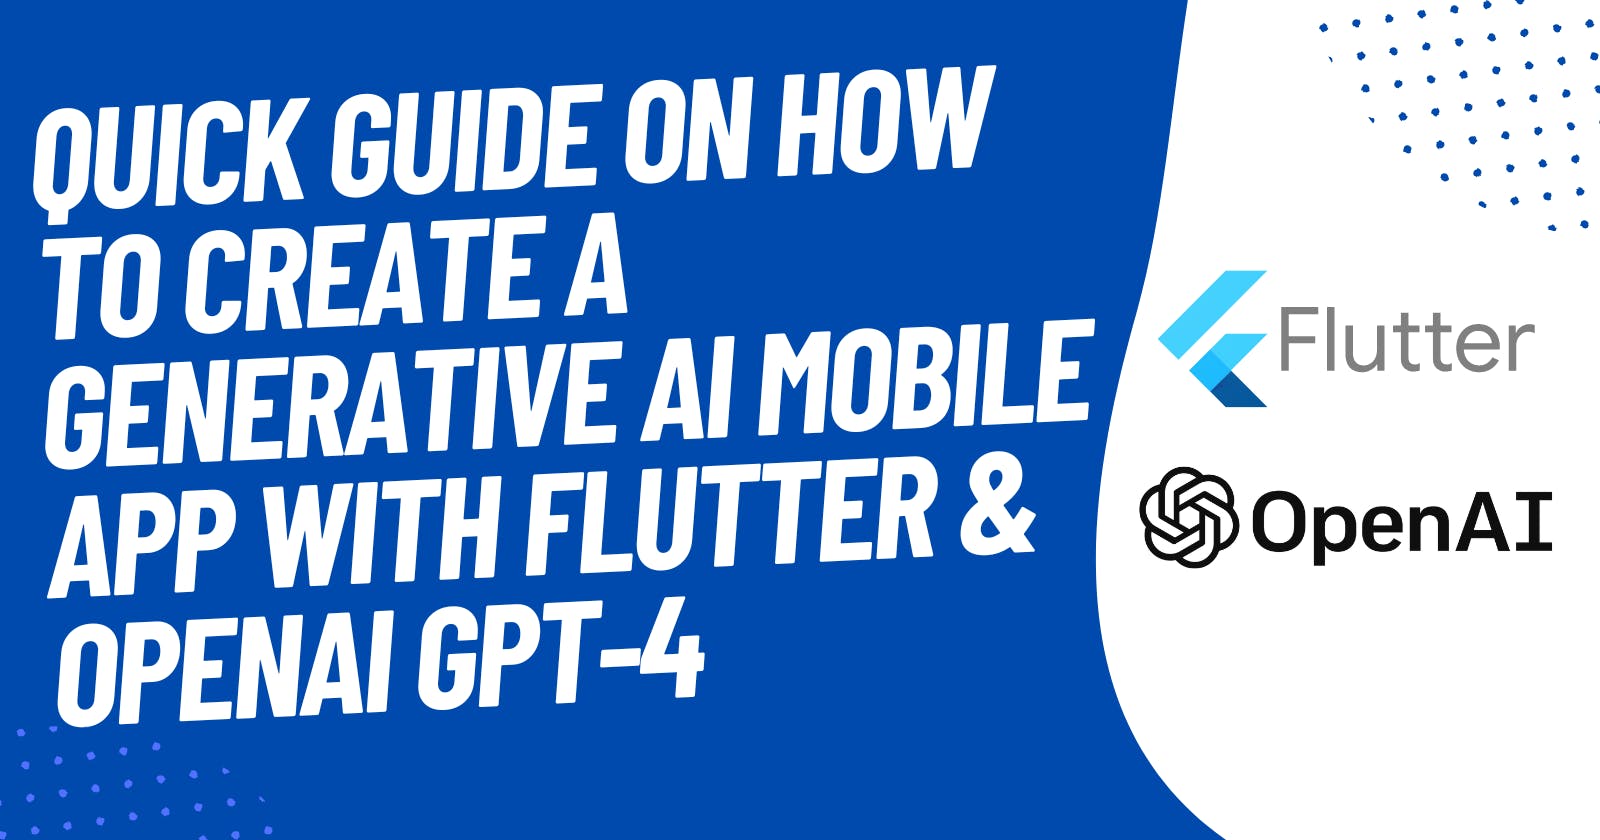 Quick Guide On How To Create a Generative AI Mobile App with Flutter & OpenAI GPT-4